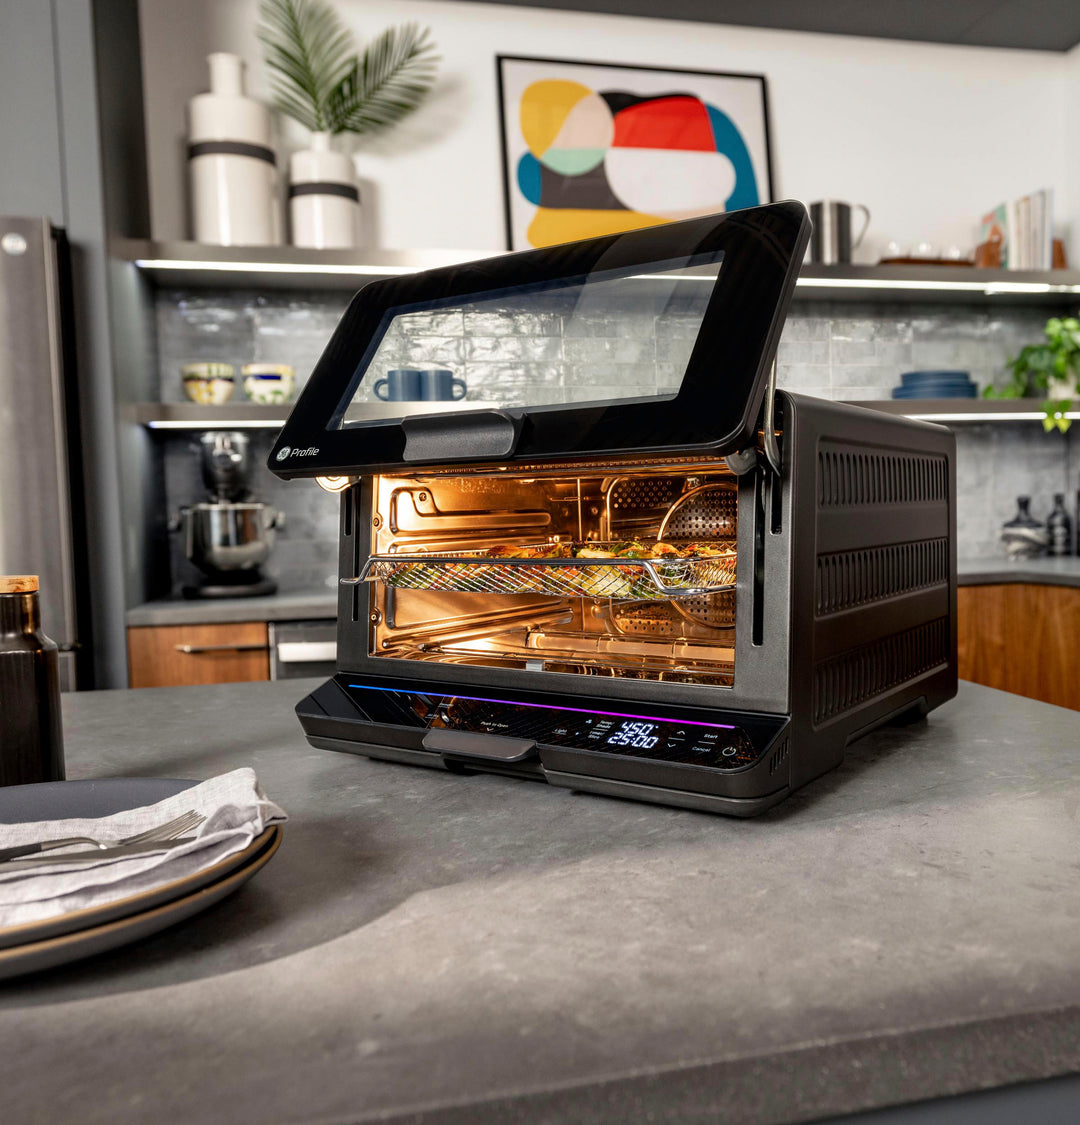 GE Profile - Smart Oven with No Preheat, Air Fry and Built-in WiFi - Black_6